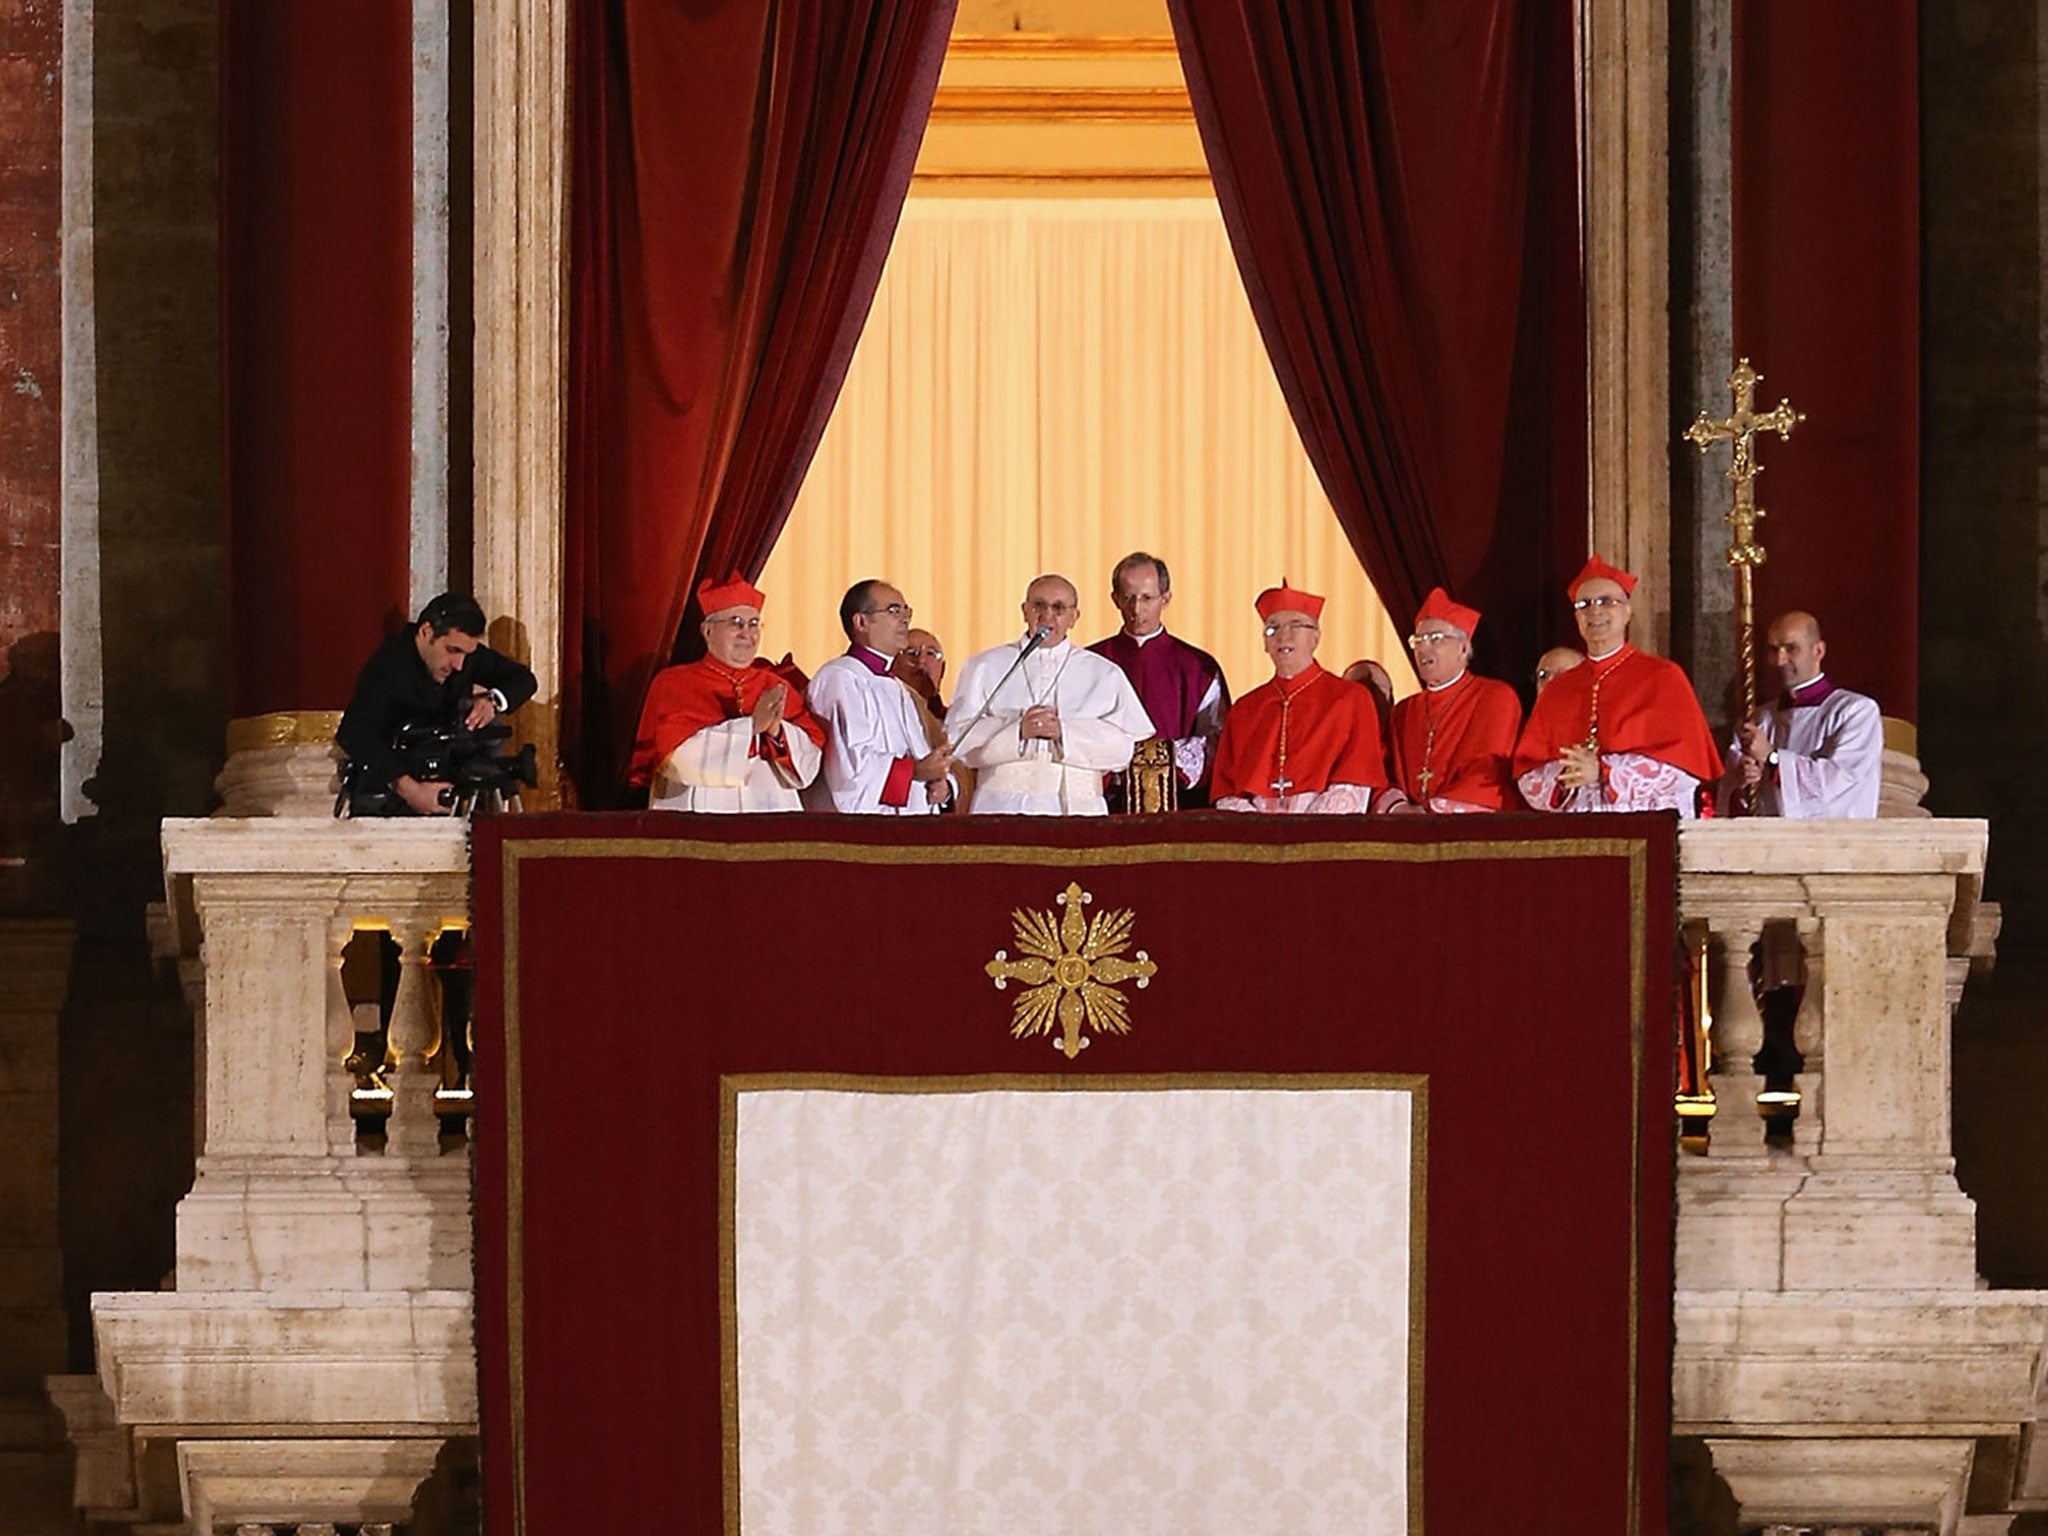 March: Newly elected Pope Francis I appears on the central balcony of St Peter's Basilica in Vatican City, Vatican.